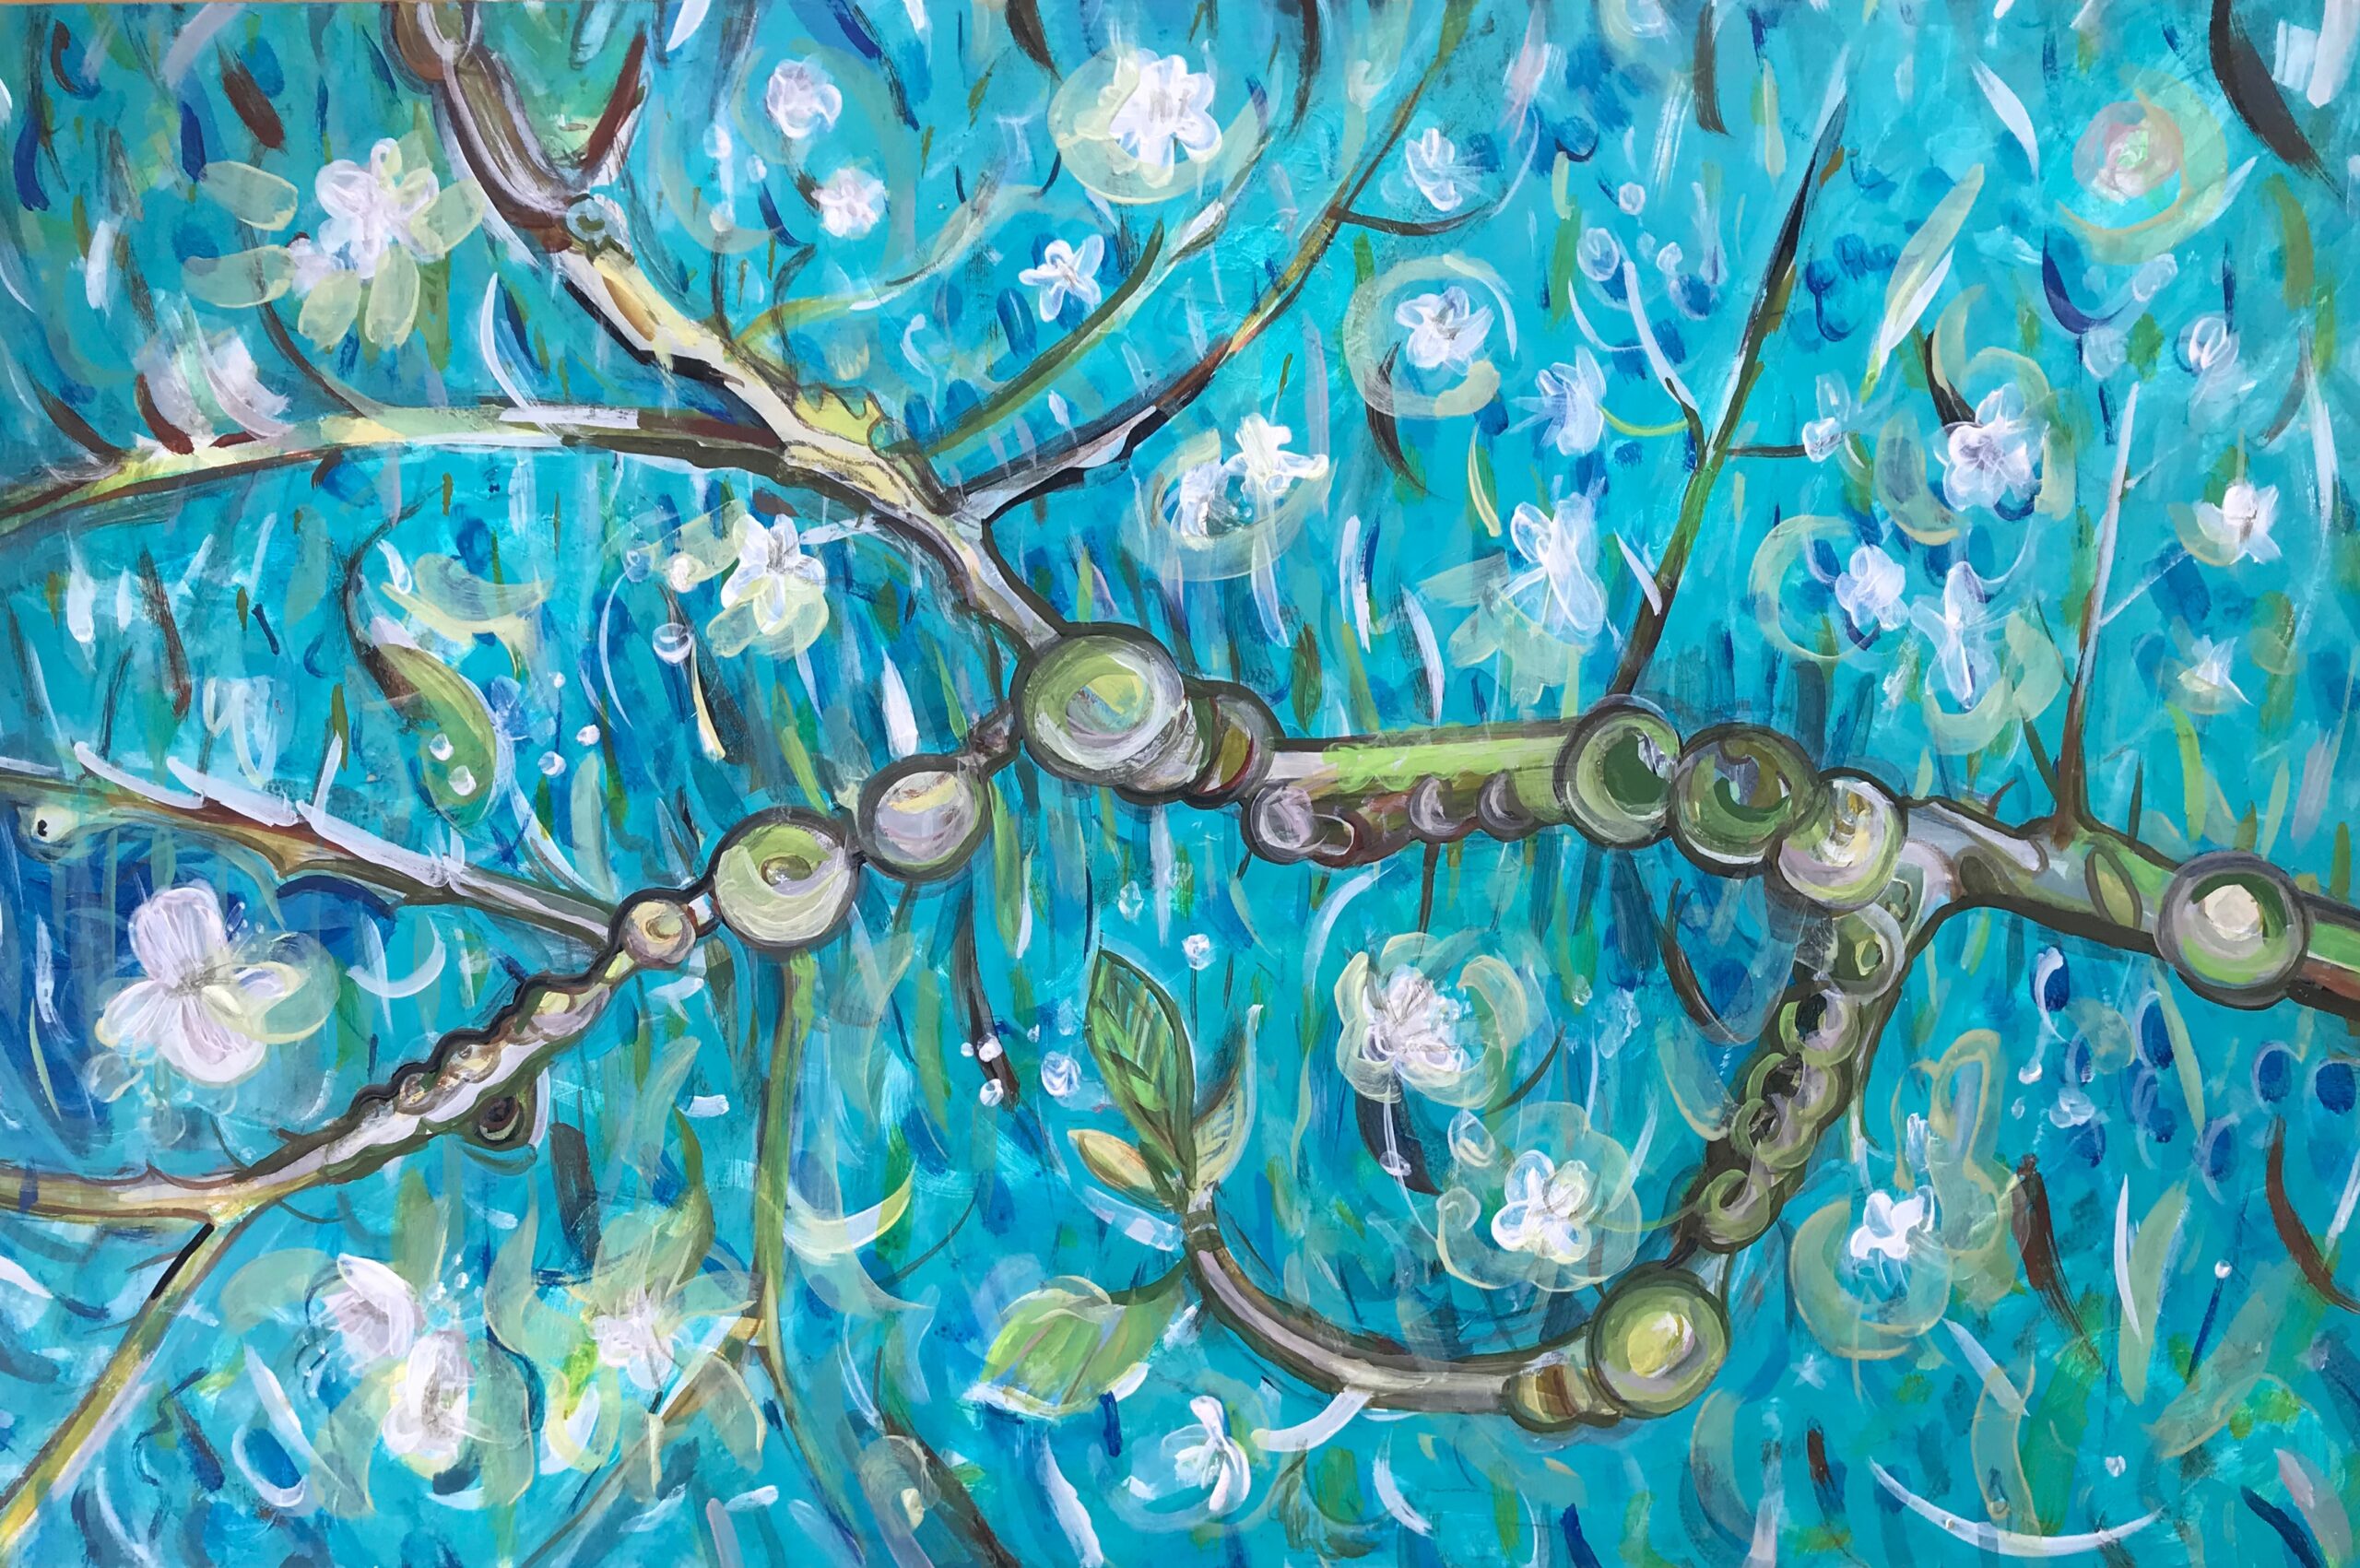 Mostly blue textured acrylic painting by Dan Nuttall in the style of Vincent Van Gogh, showing a cherry tree branch in bloom which has been pruned and is now laying on the ground.